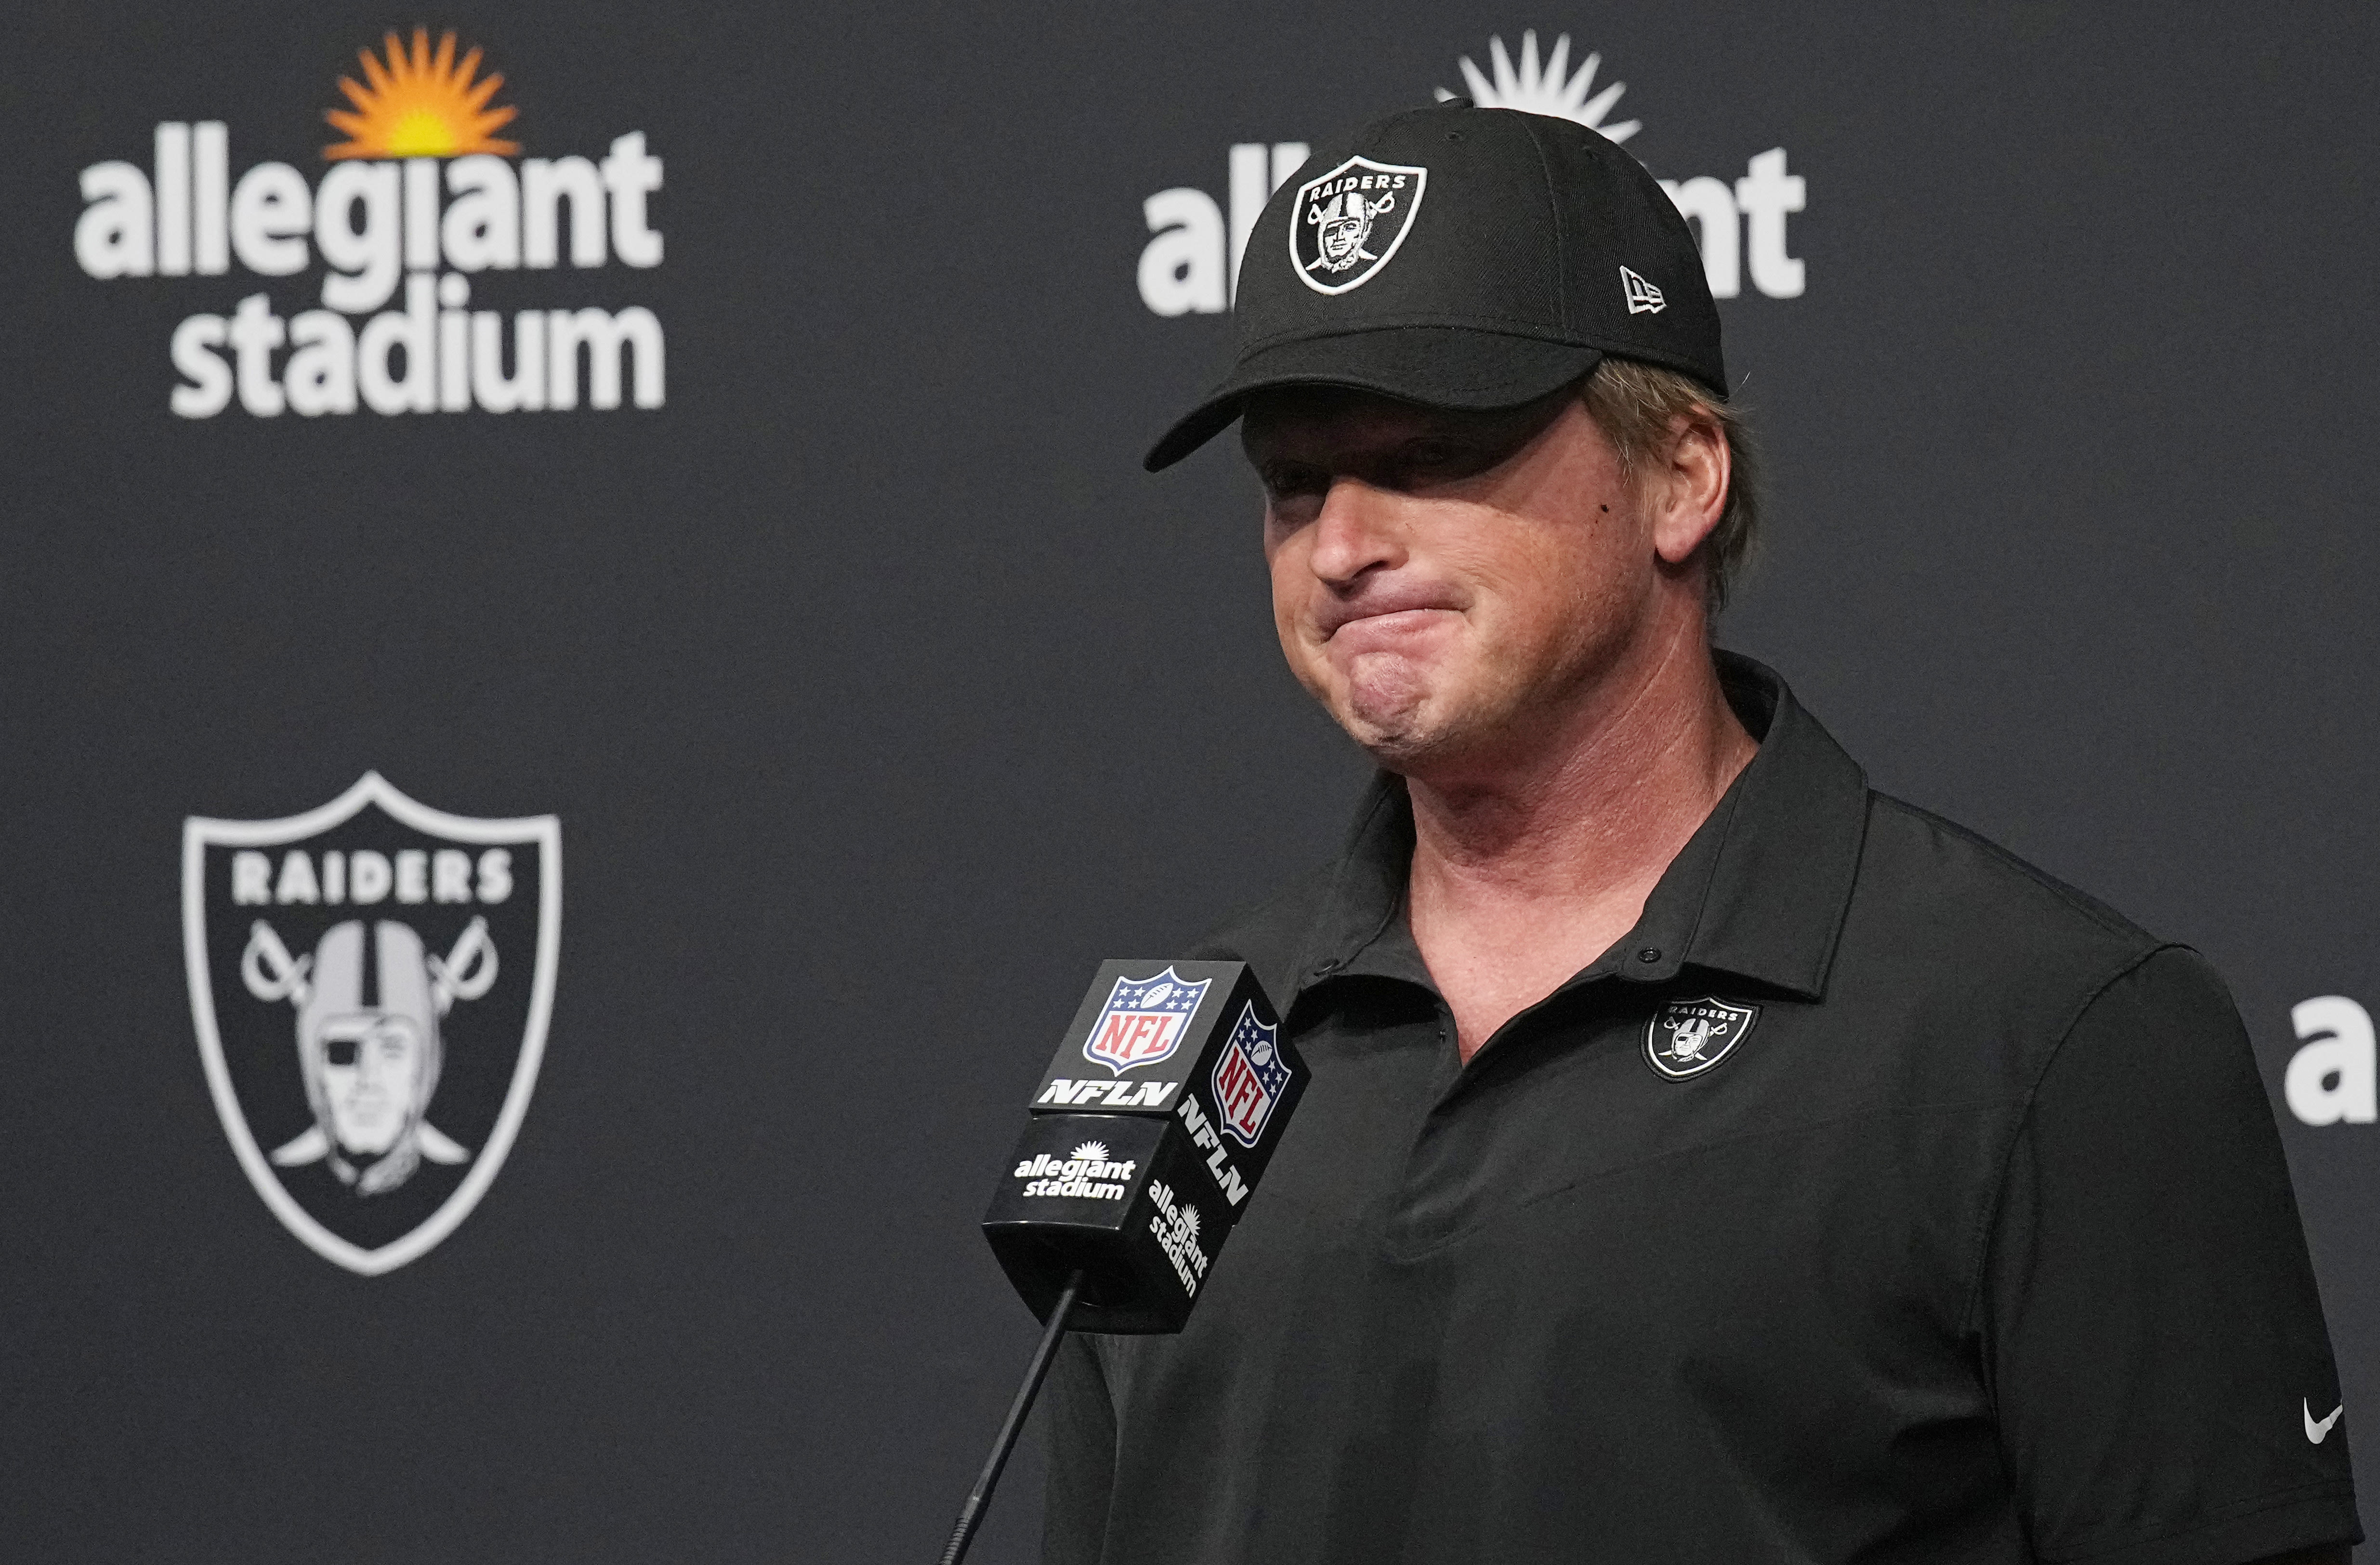 Former NFL coach Jon Gruden loses Nevada high court ruling in NFL emails lawsuit